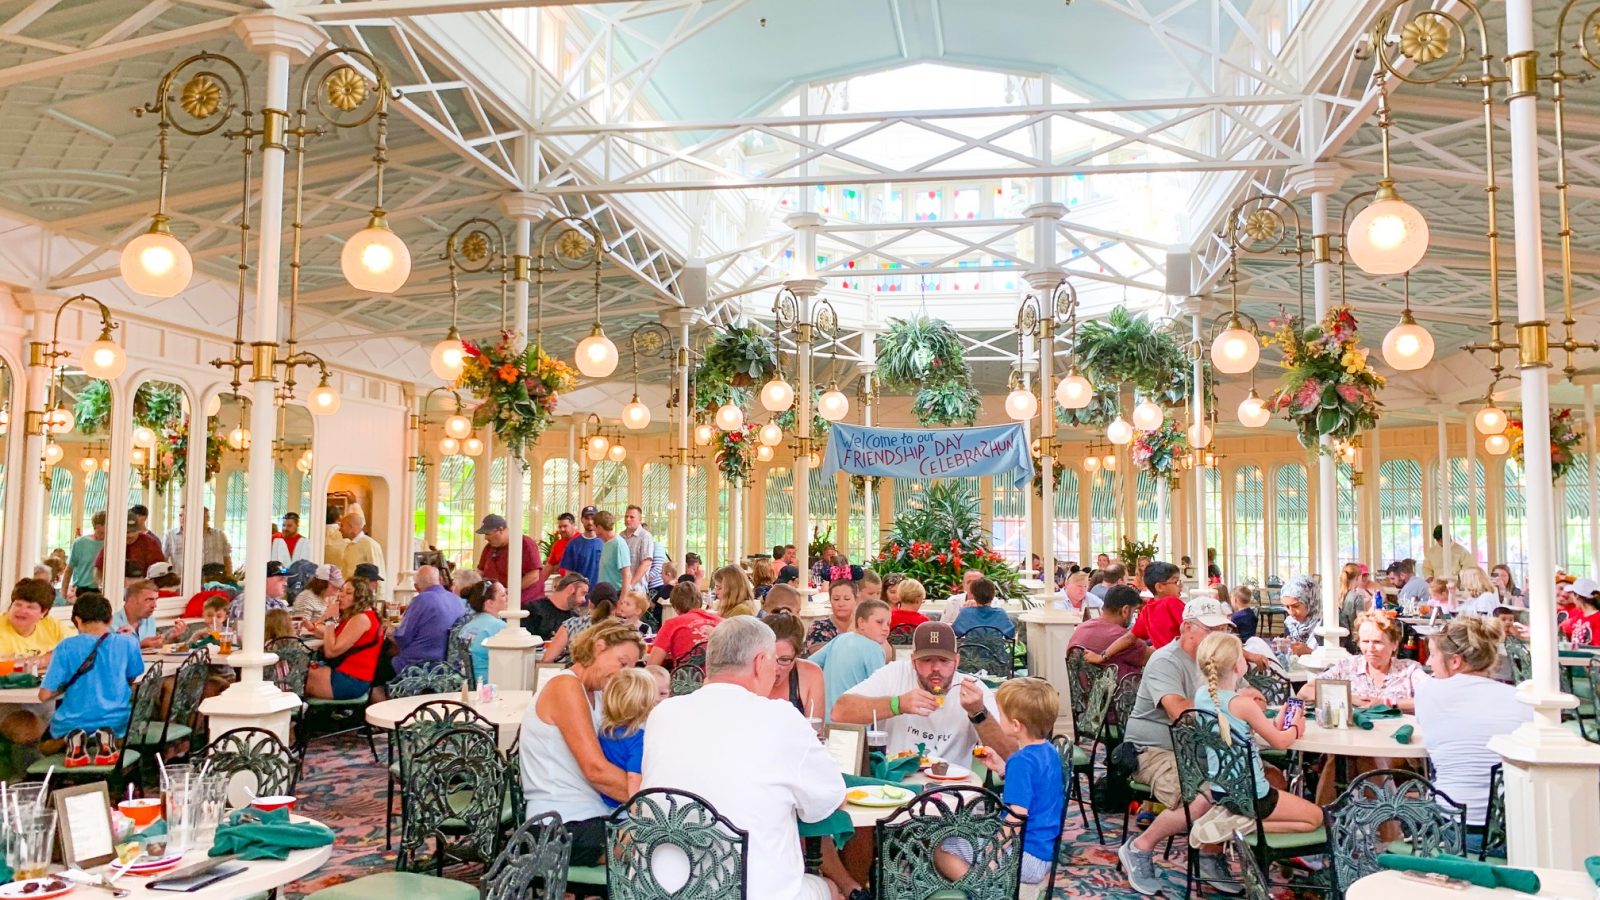 greenhouse-like dining area filled with people Magic Kingdom restaurants